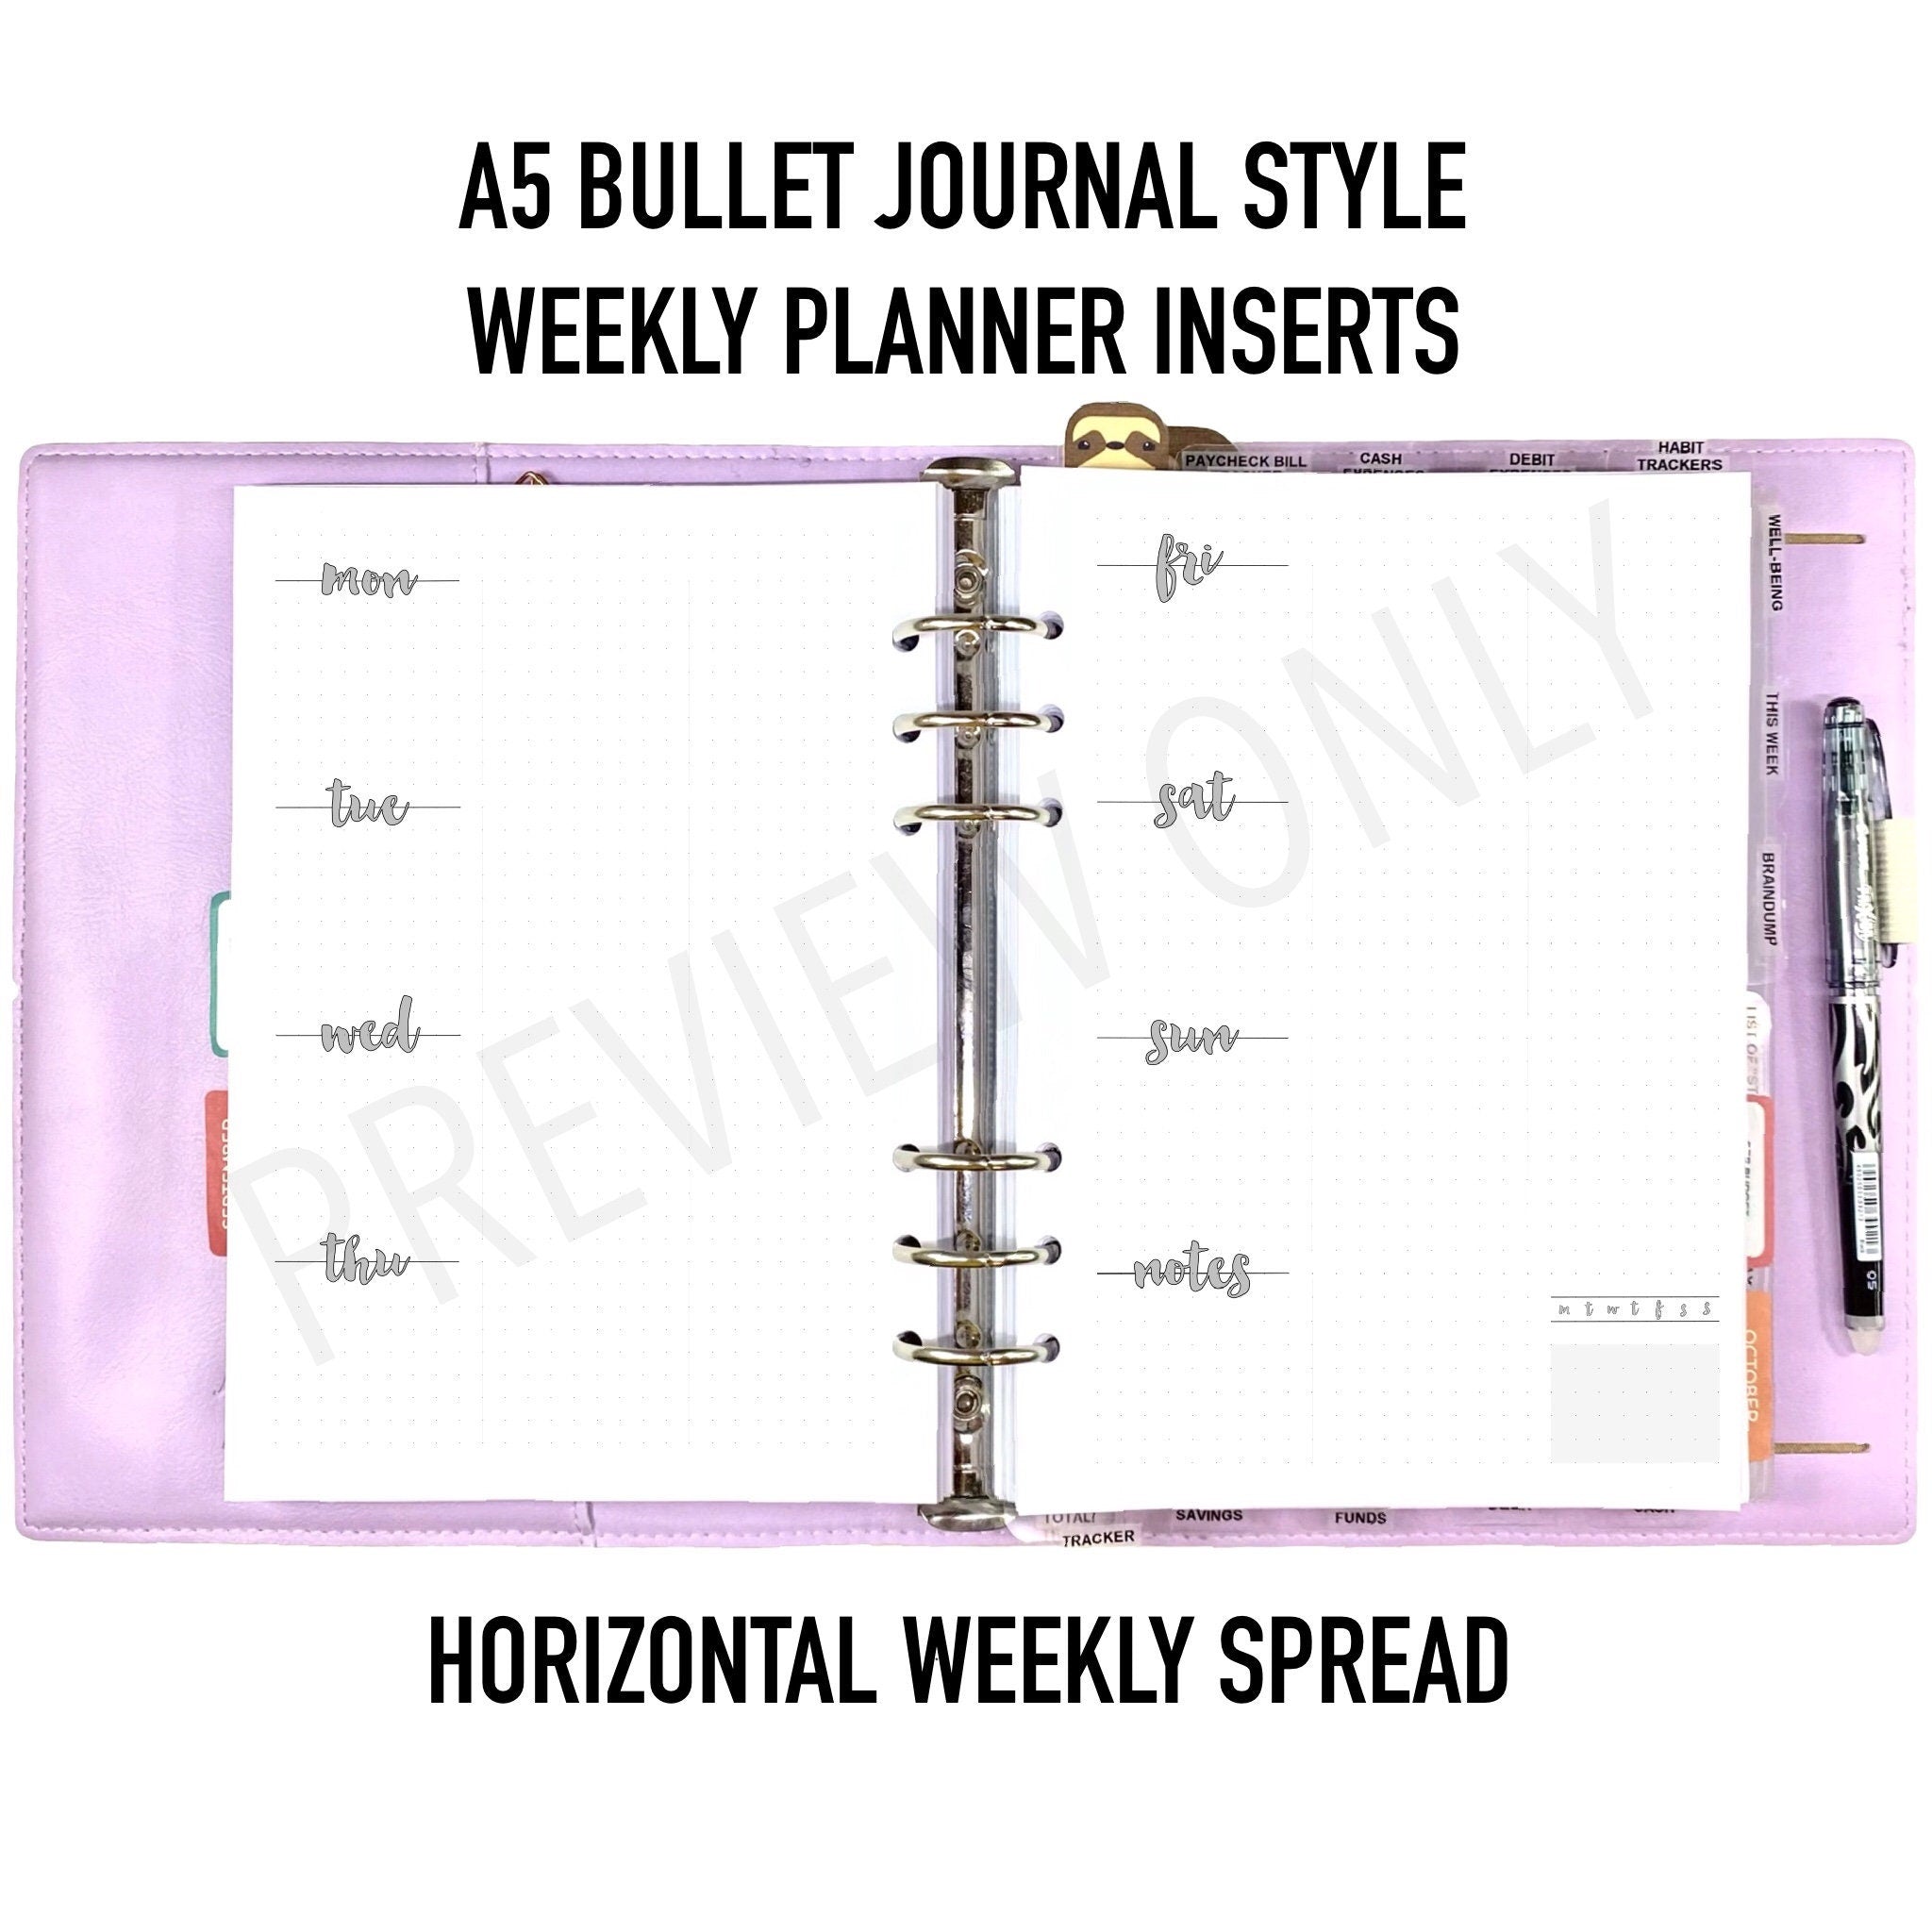 stationery, weekly spread and bullet journal - image #6847471 on